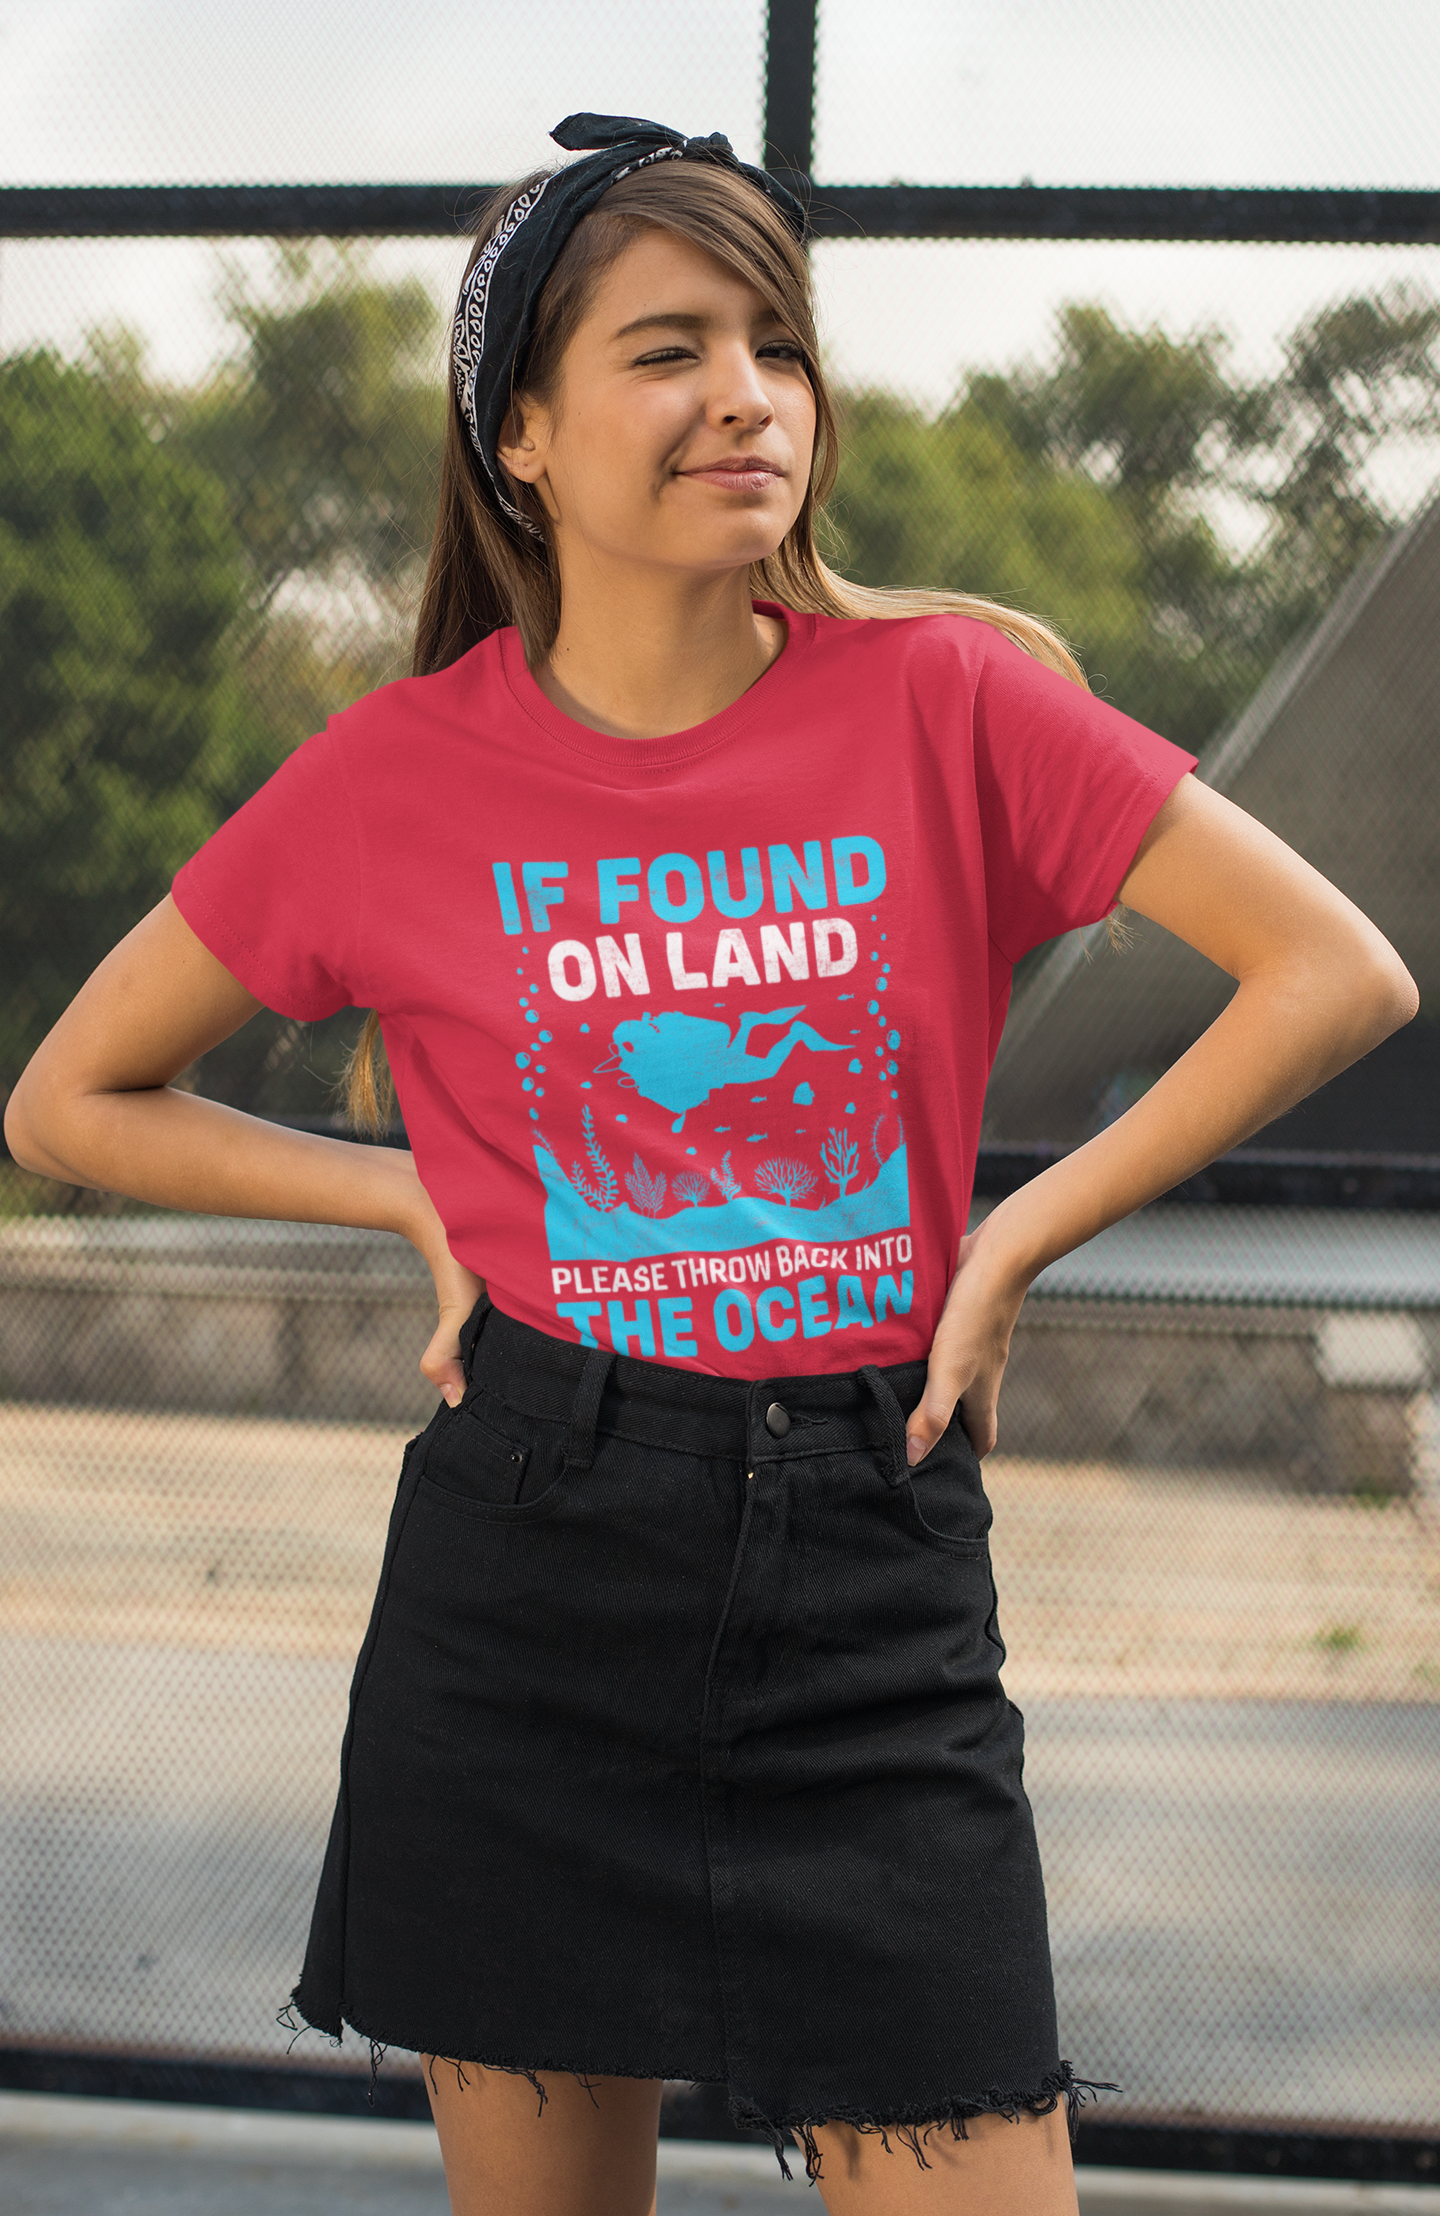 If found on land please throw back into the ocean red t-shirt worn by winking woman